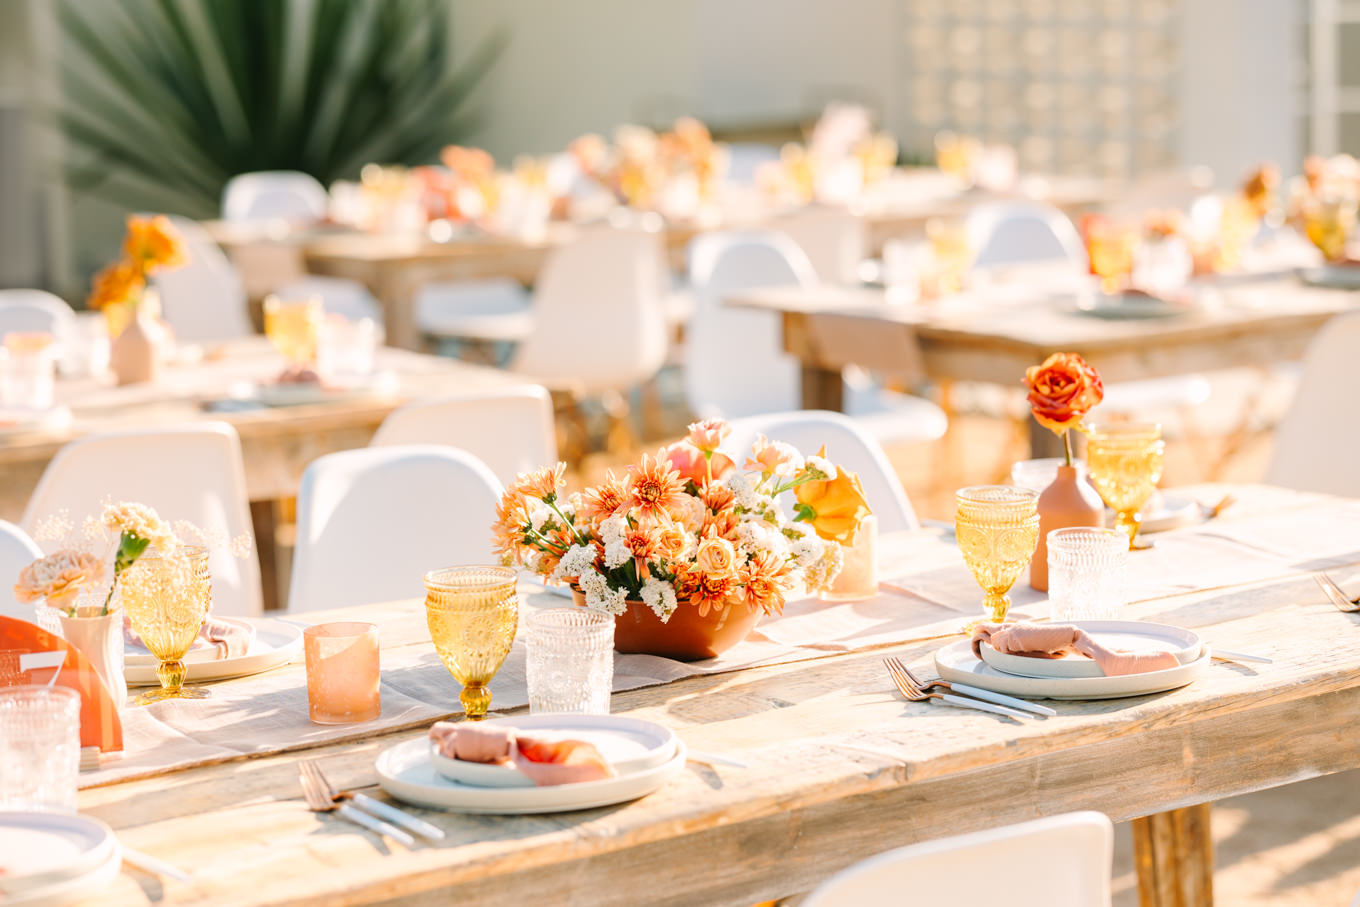 Flower details at wedding reception | Pink and orange Lautner Compound wedding | Colorful Palm Springs wedding photography | #palmspringsphotographer #palmspringswedding #lautnercompound #southerncaliforniawedding  Source: Mary Costa Photography | Los Angeles